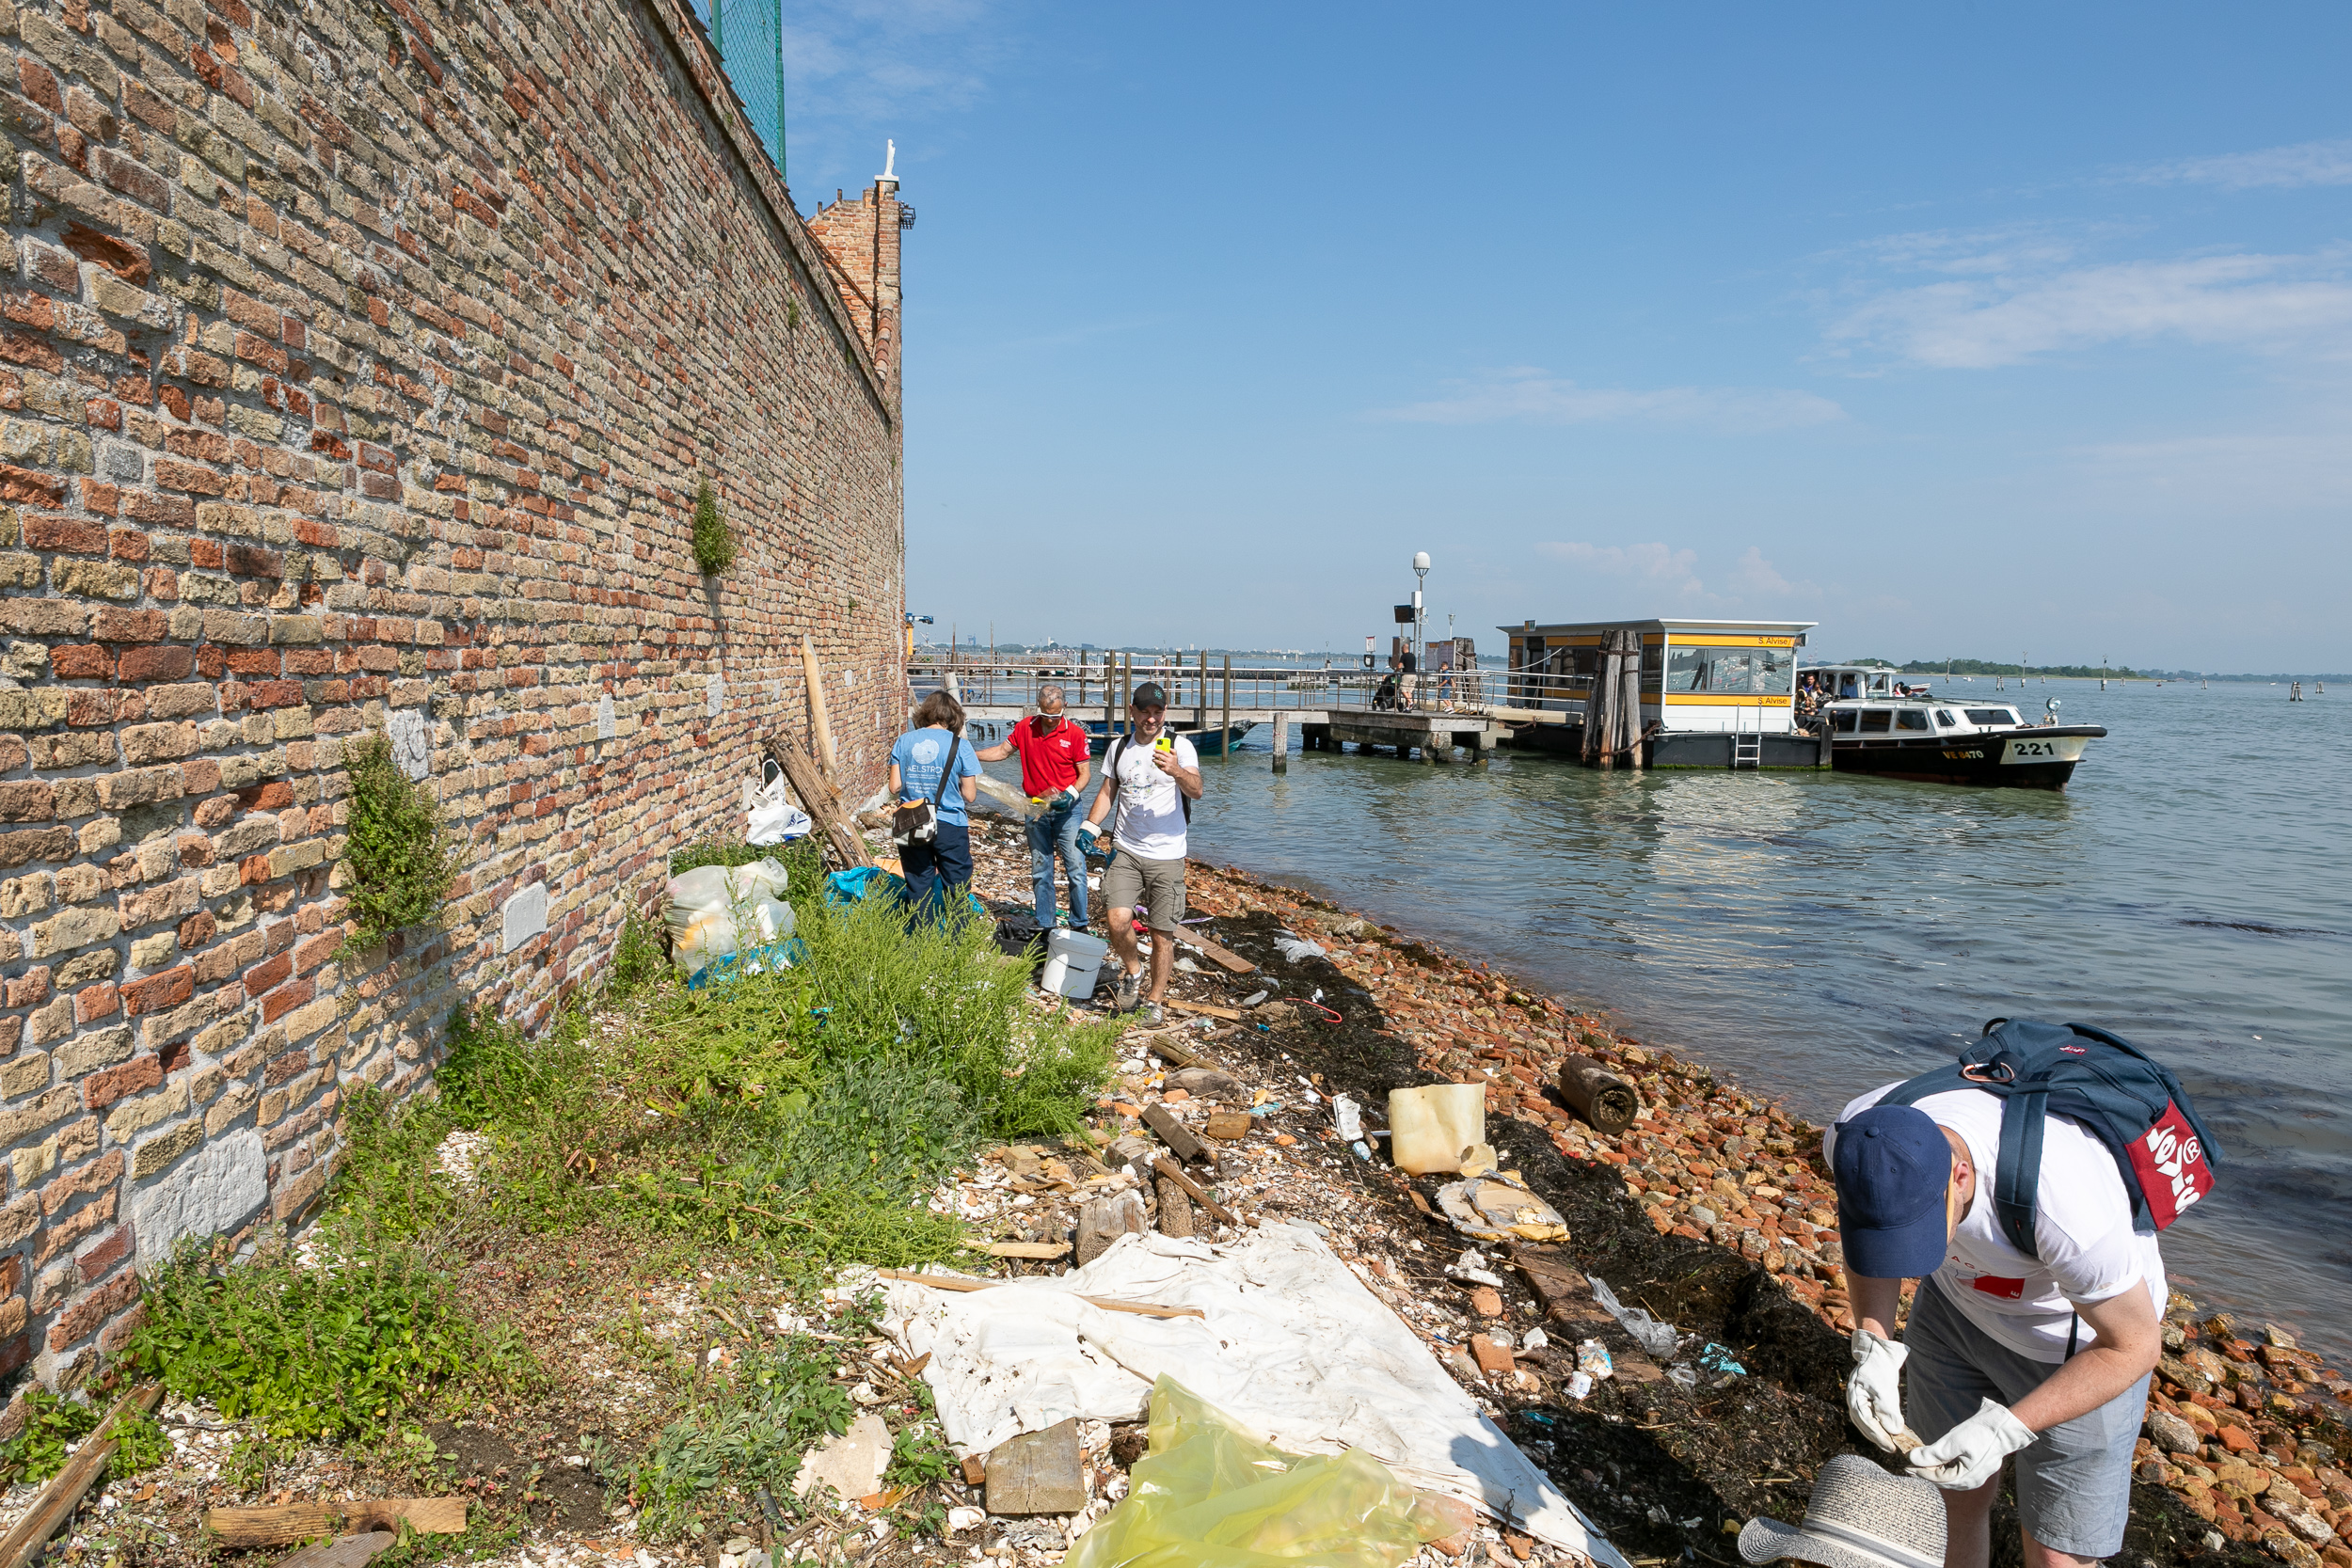 Clean-up Day in the Venetian lagoon: more than a thousand kilos of litter collected